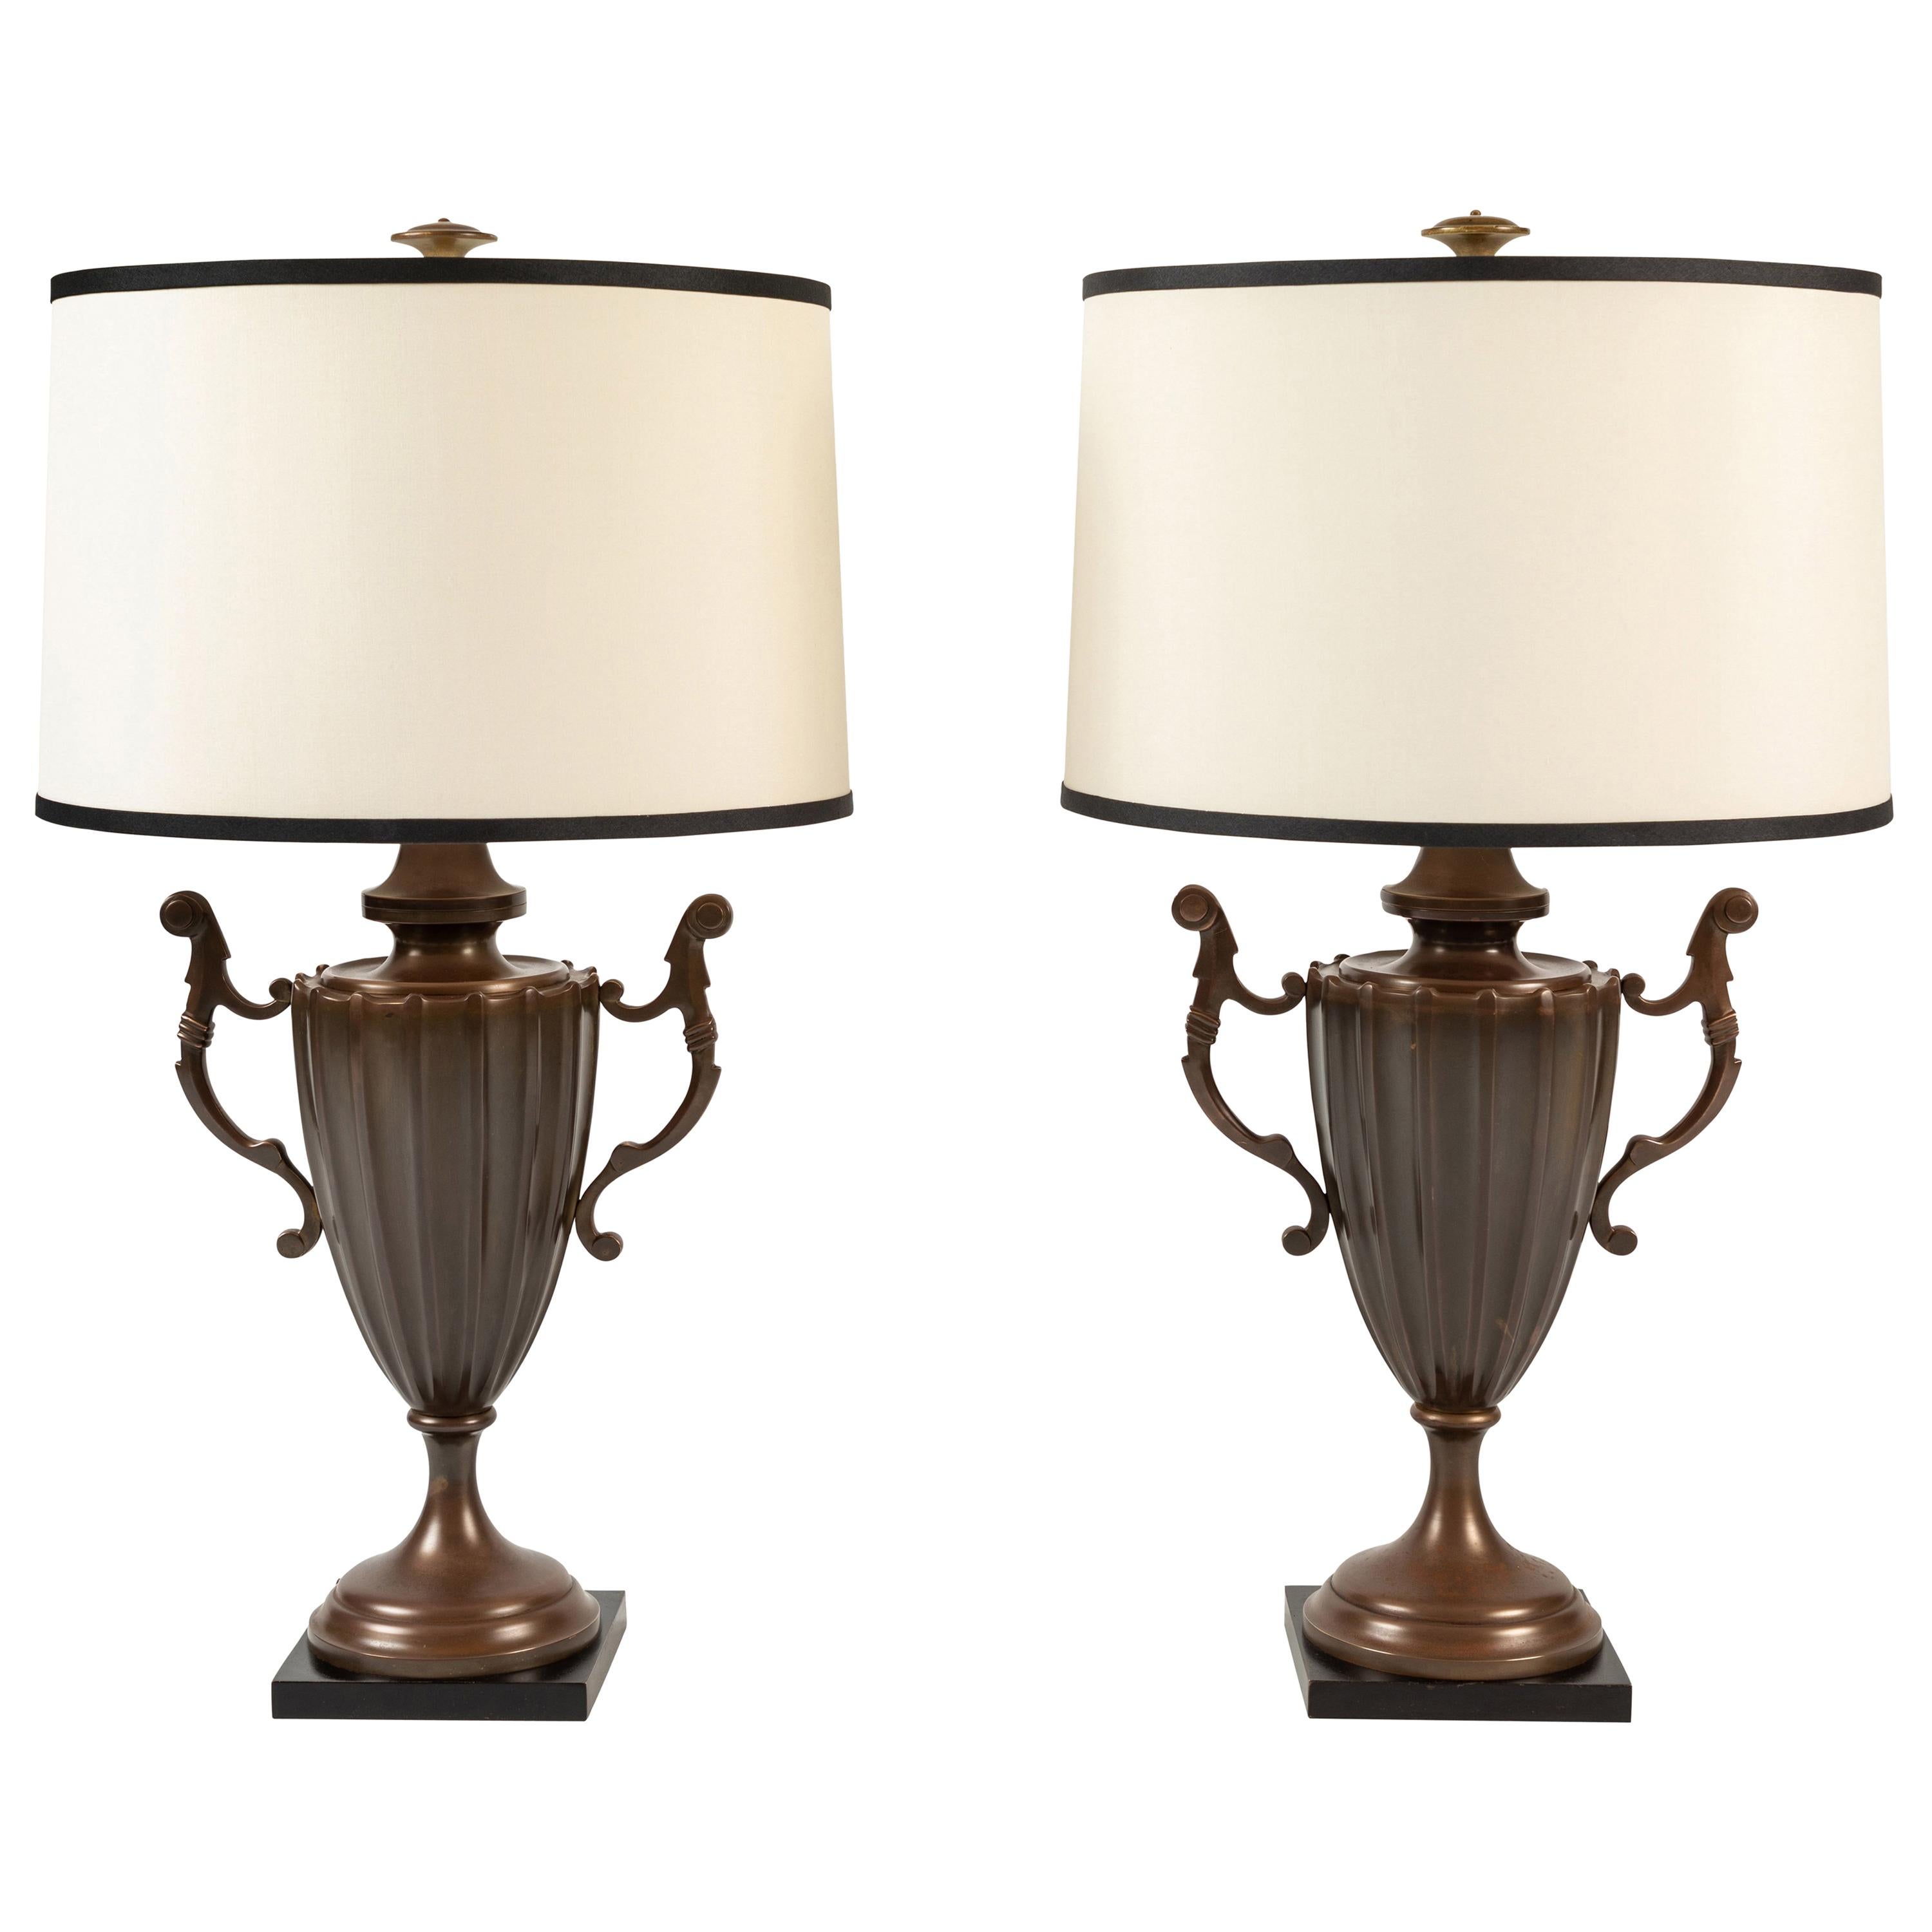 Pair of Urn Form Table Lamps by Chapman